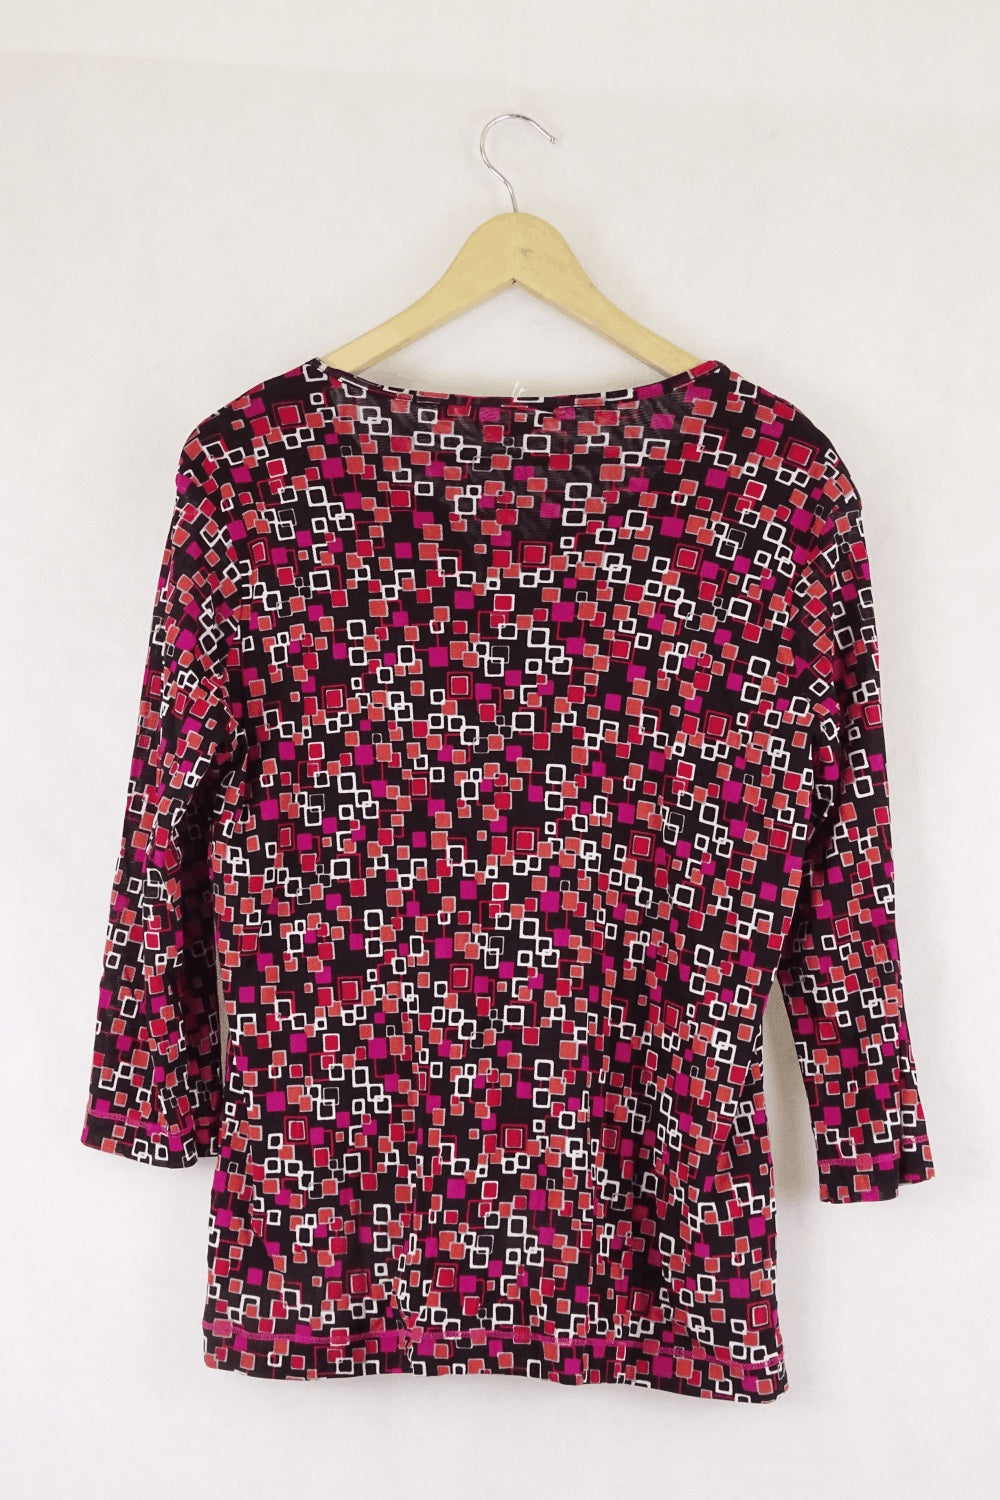 Marco Polo Patterened Pink And Orange Top Xl